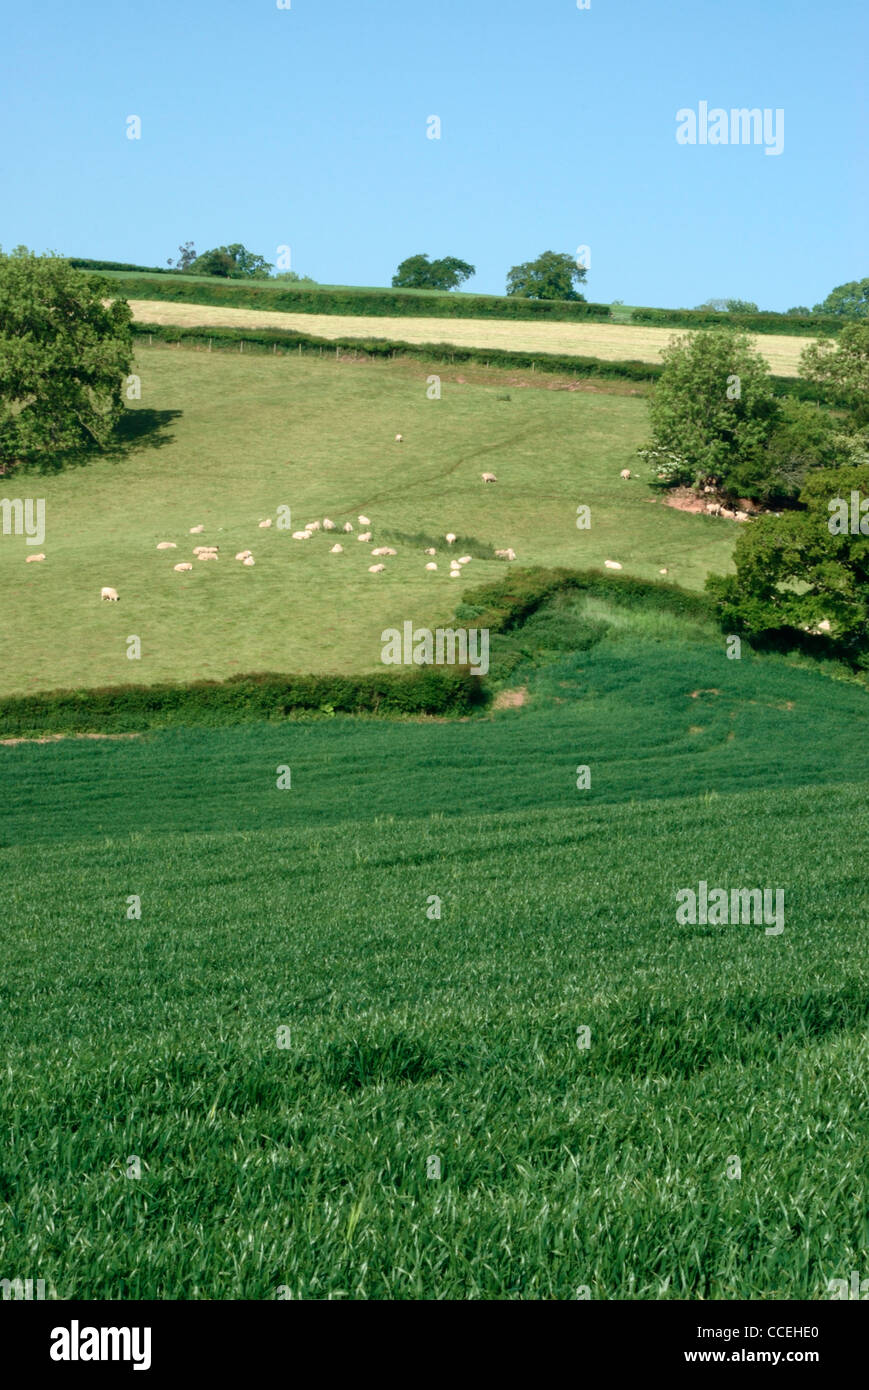 Sheep grazing in the distance, Axe Valley near Axminster, Devon  countryside, england, UK Stock Photo